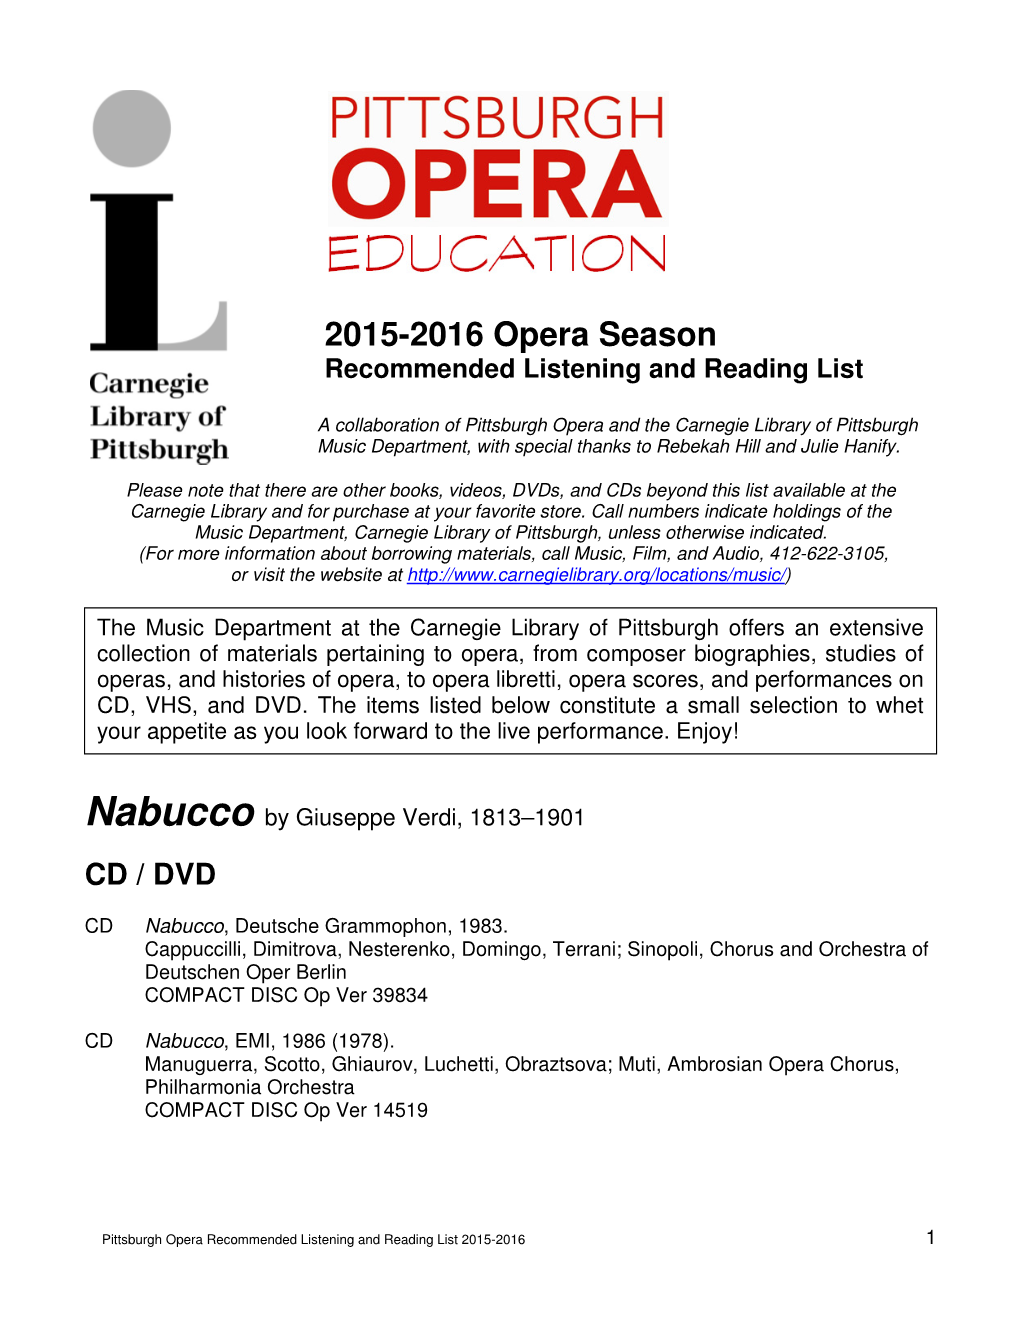 2015-2016 Opera Season Recommended Listening and Reading List